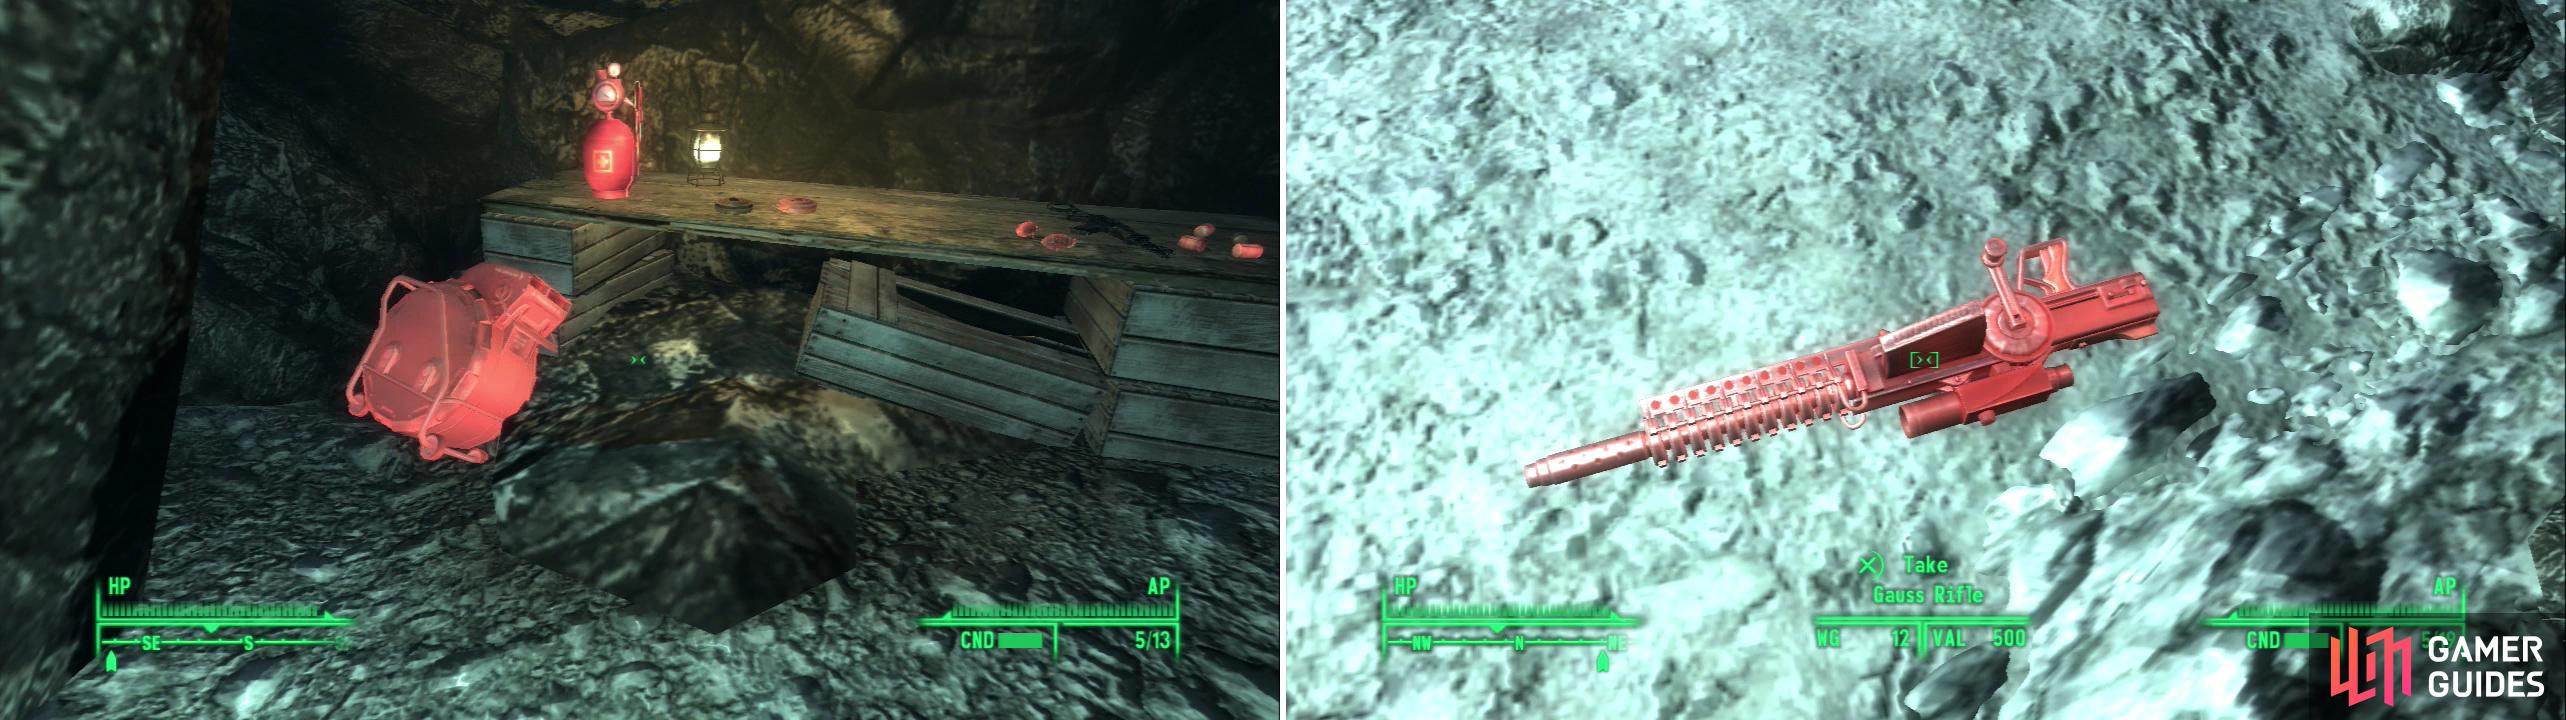 Ammo and health dispeners replenish your ammo and heatlh, respectively (left). Be sure the grab the Gauss Rifle dropped by the paratrooper (right).